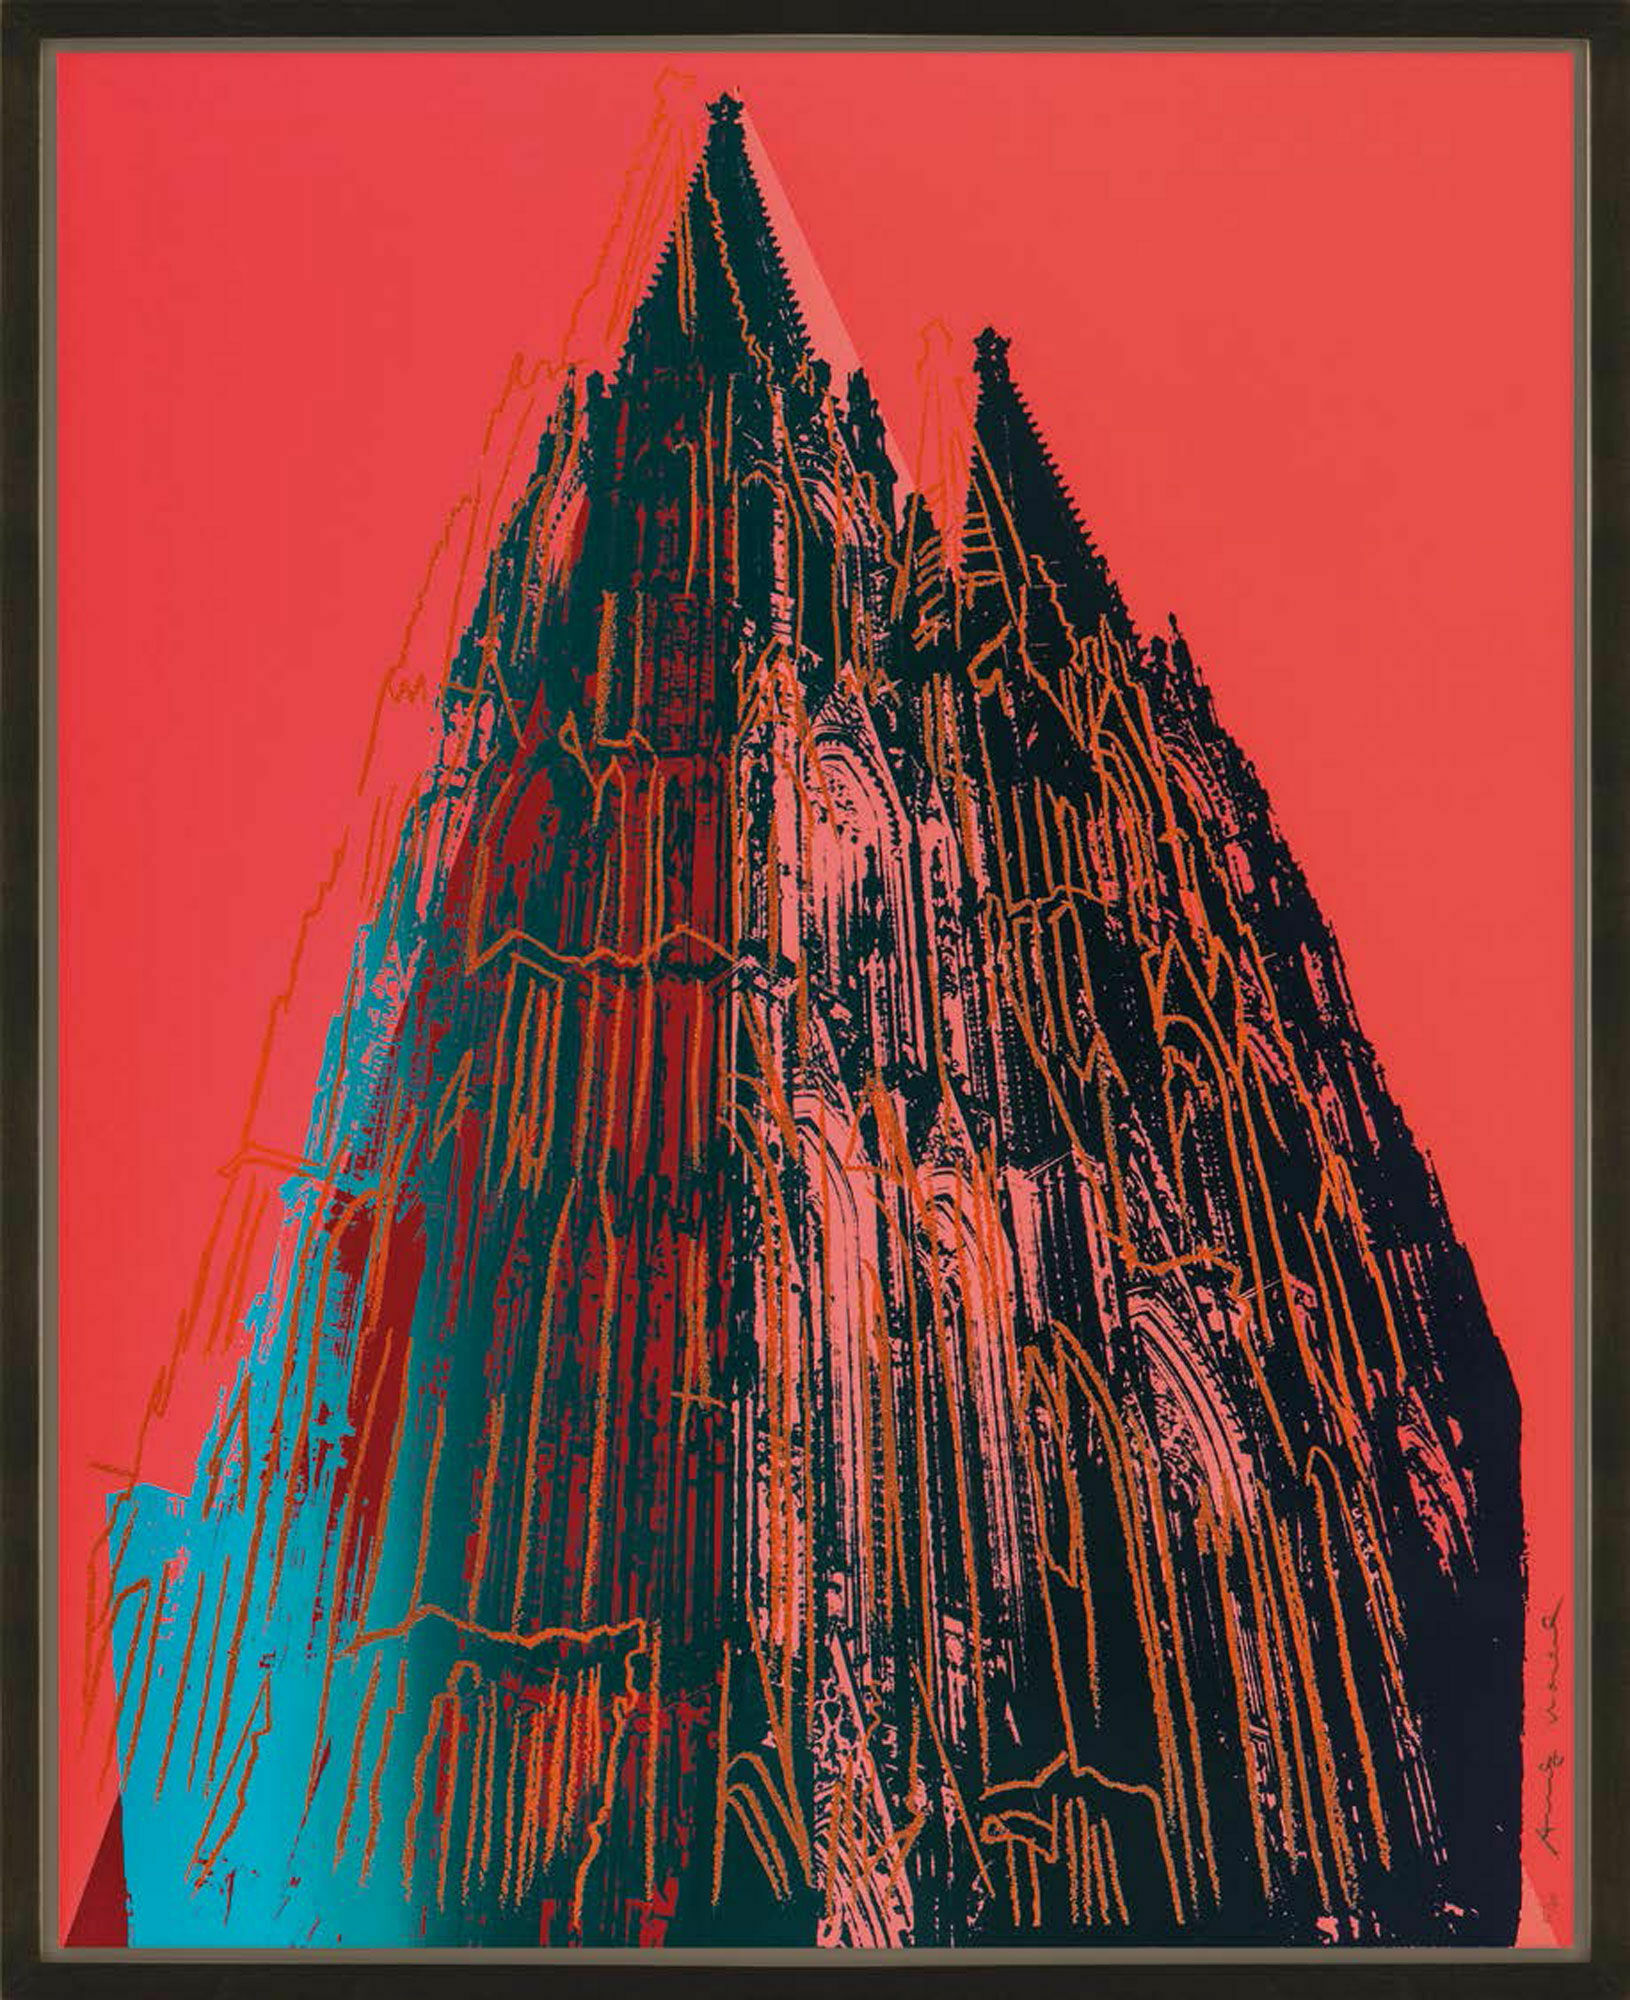 Picture "Cologne Cathedral II.361" (1985) by Andy Warhol